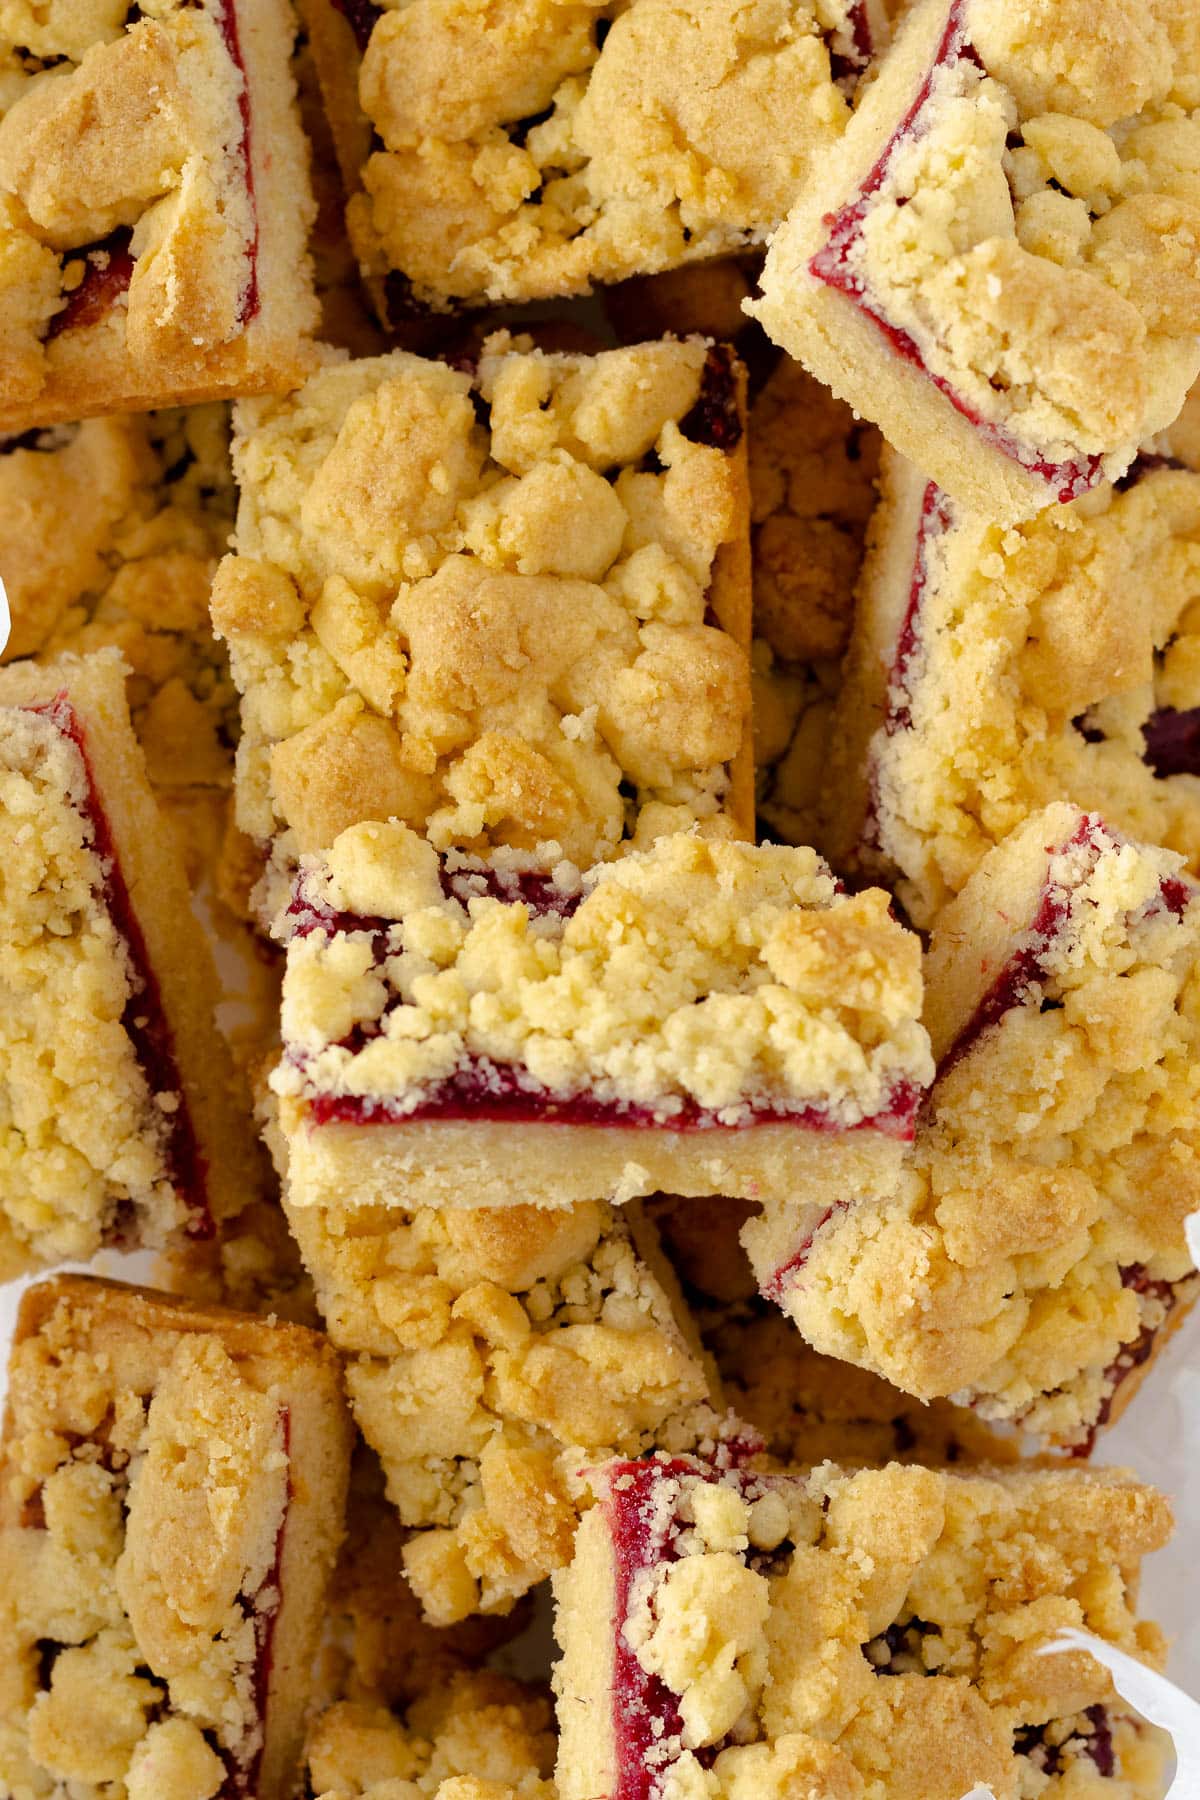 Jam squares in a biscuit tin lined with parchment paper.